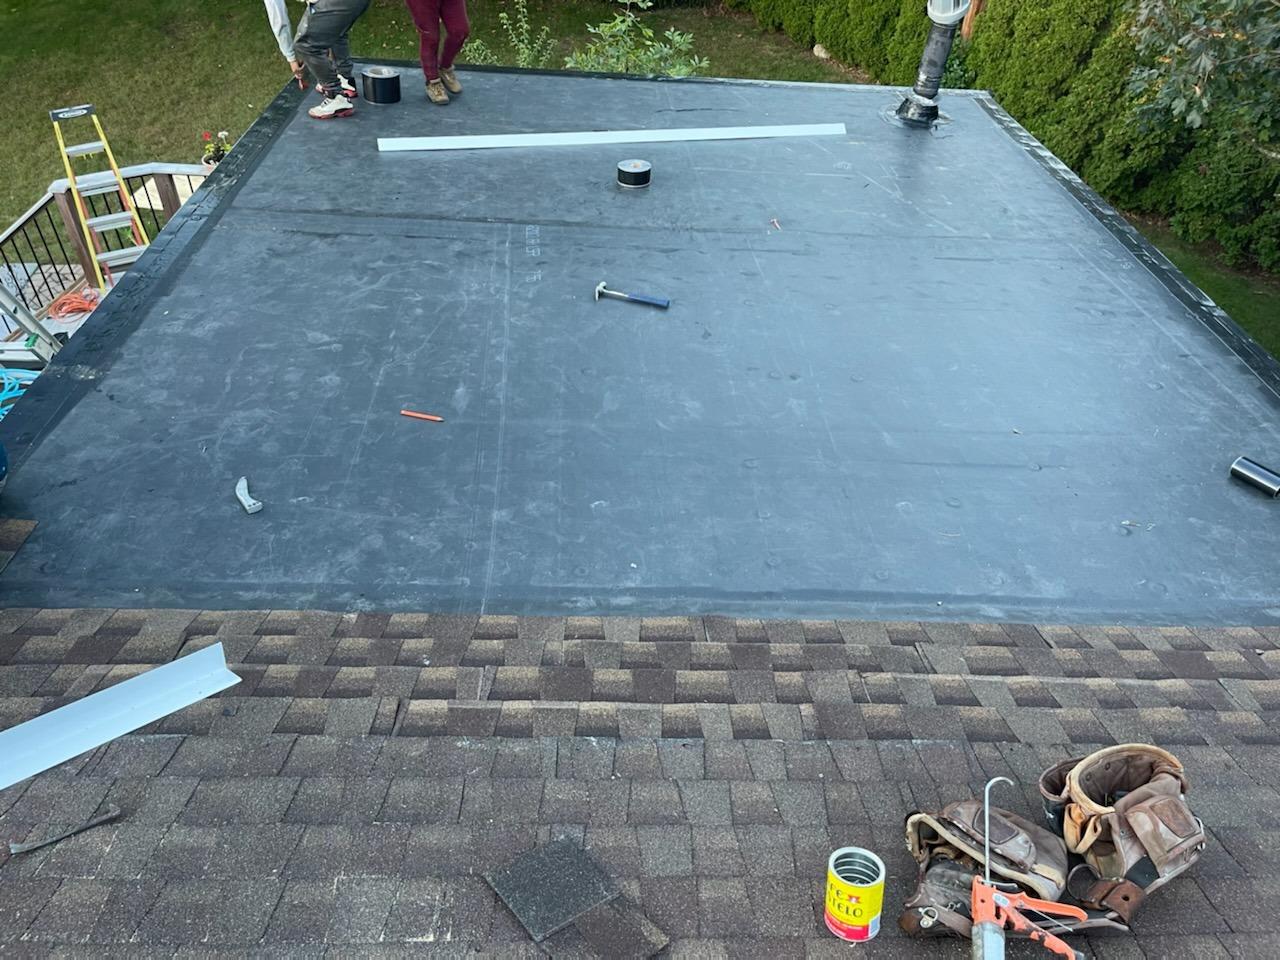 new flat rubber roof installed on home